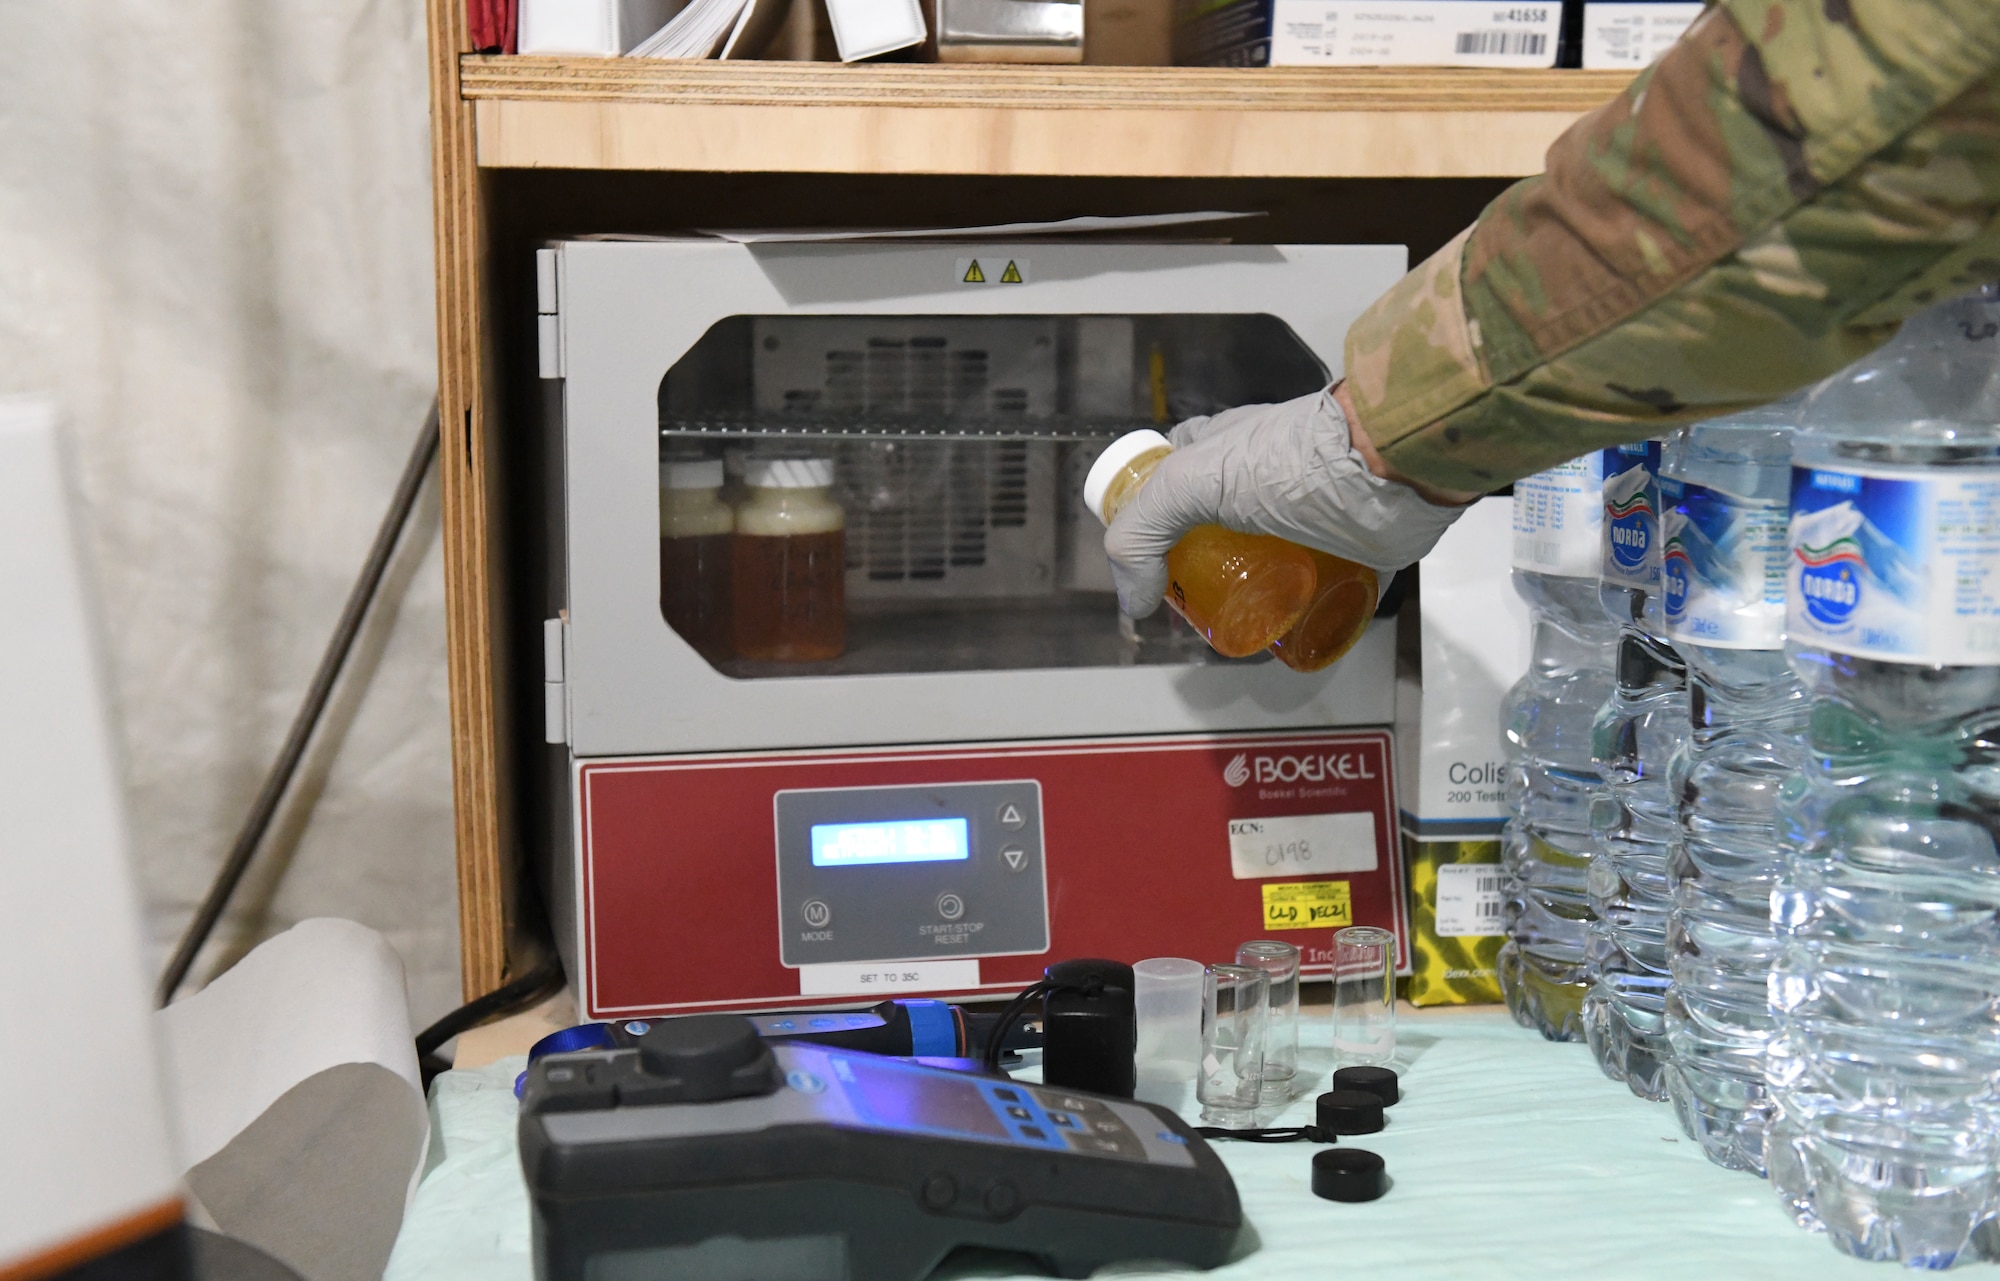 U.S. Air Force Tech. Sgt. Kristopher Beckwith, 768th Expeditionary Air Base Squadron bioenvironmental engineer, puts the sample jars with colisure powder in an incubator to test for water quality at Nigerien Air Base 101, Niamey, Niger, Feb. 16, 2021.